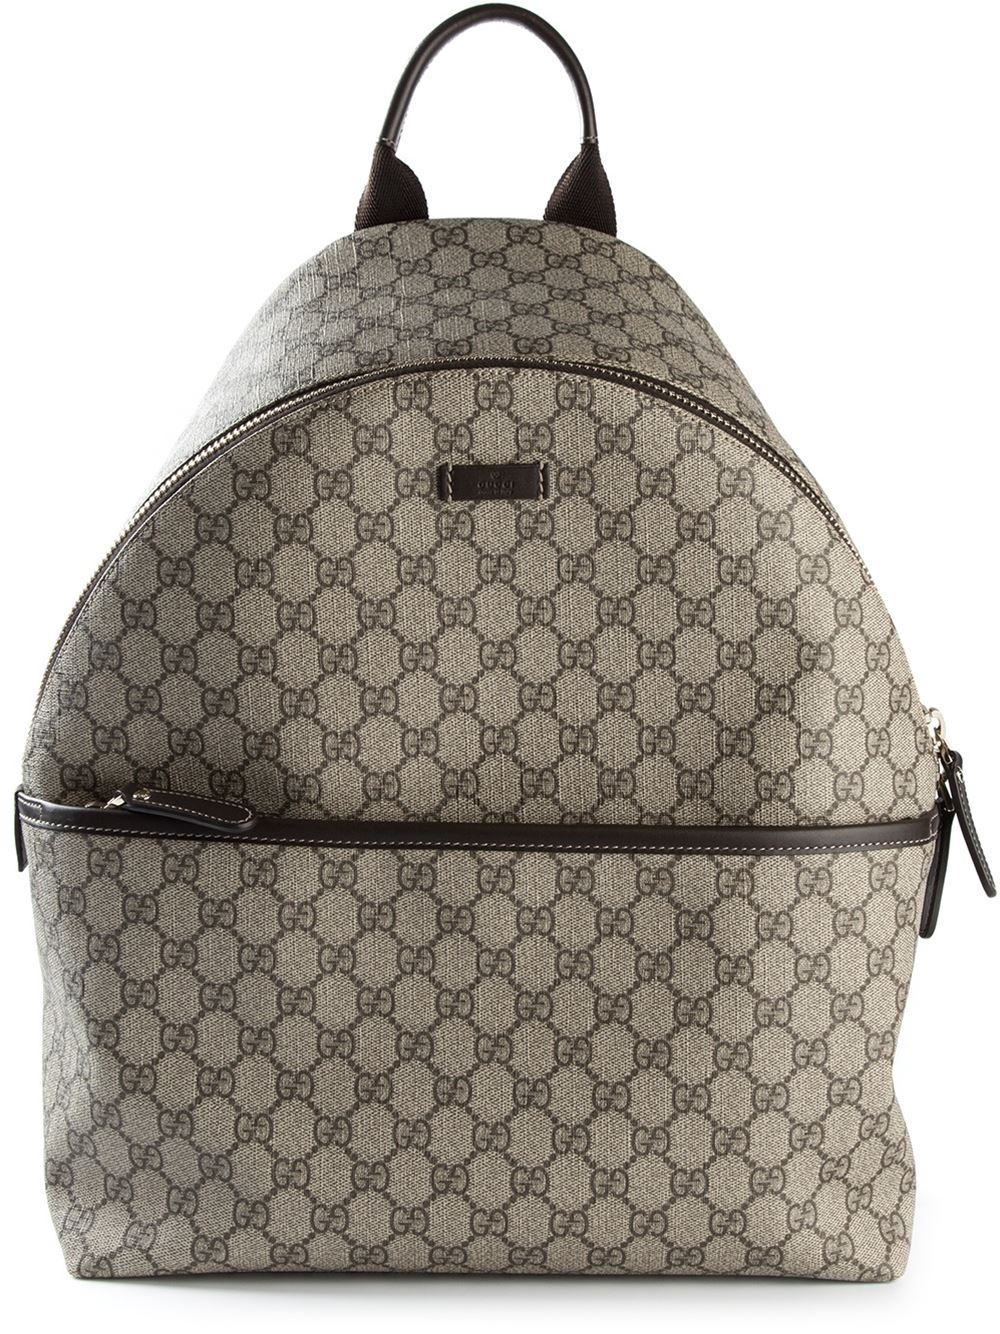 Gucci Signature Monogram Backpack in Natural - Lyst